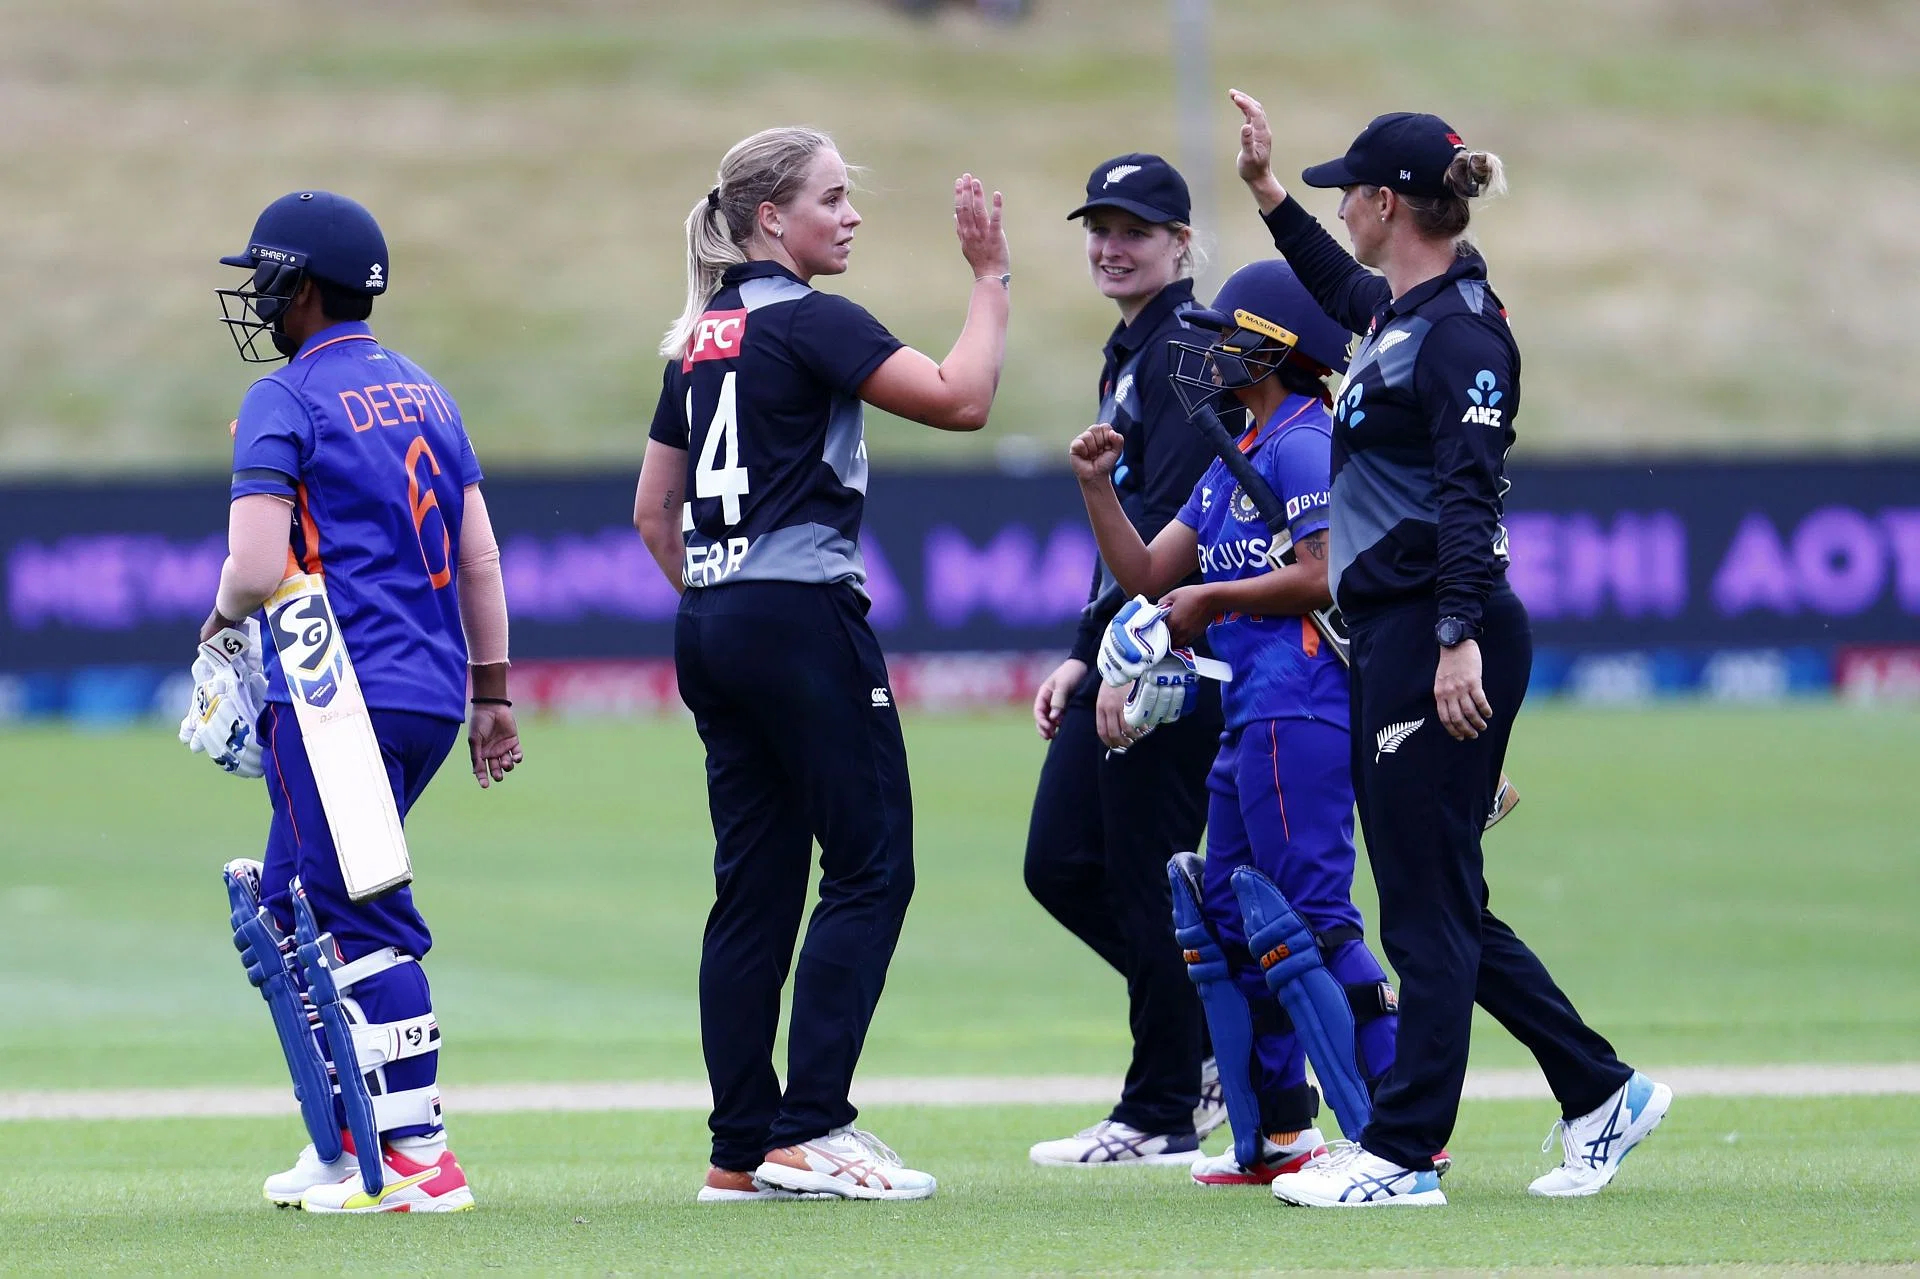 NZW vs INDW 5th ODI: Full Squad, Schedule, Date, Time, Venue, Live streaming, All you need to know New Zealand Women vs India Women 5th ODI